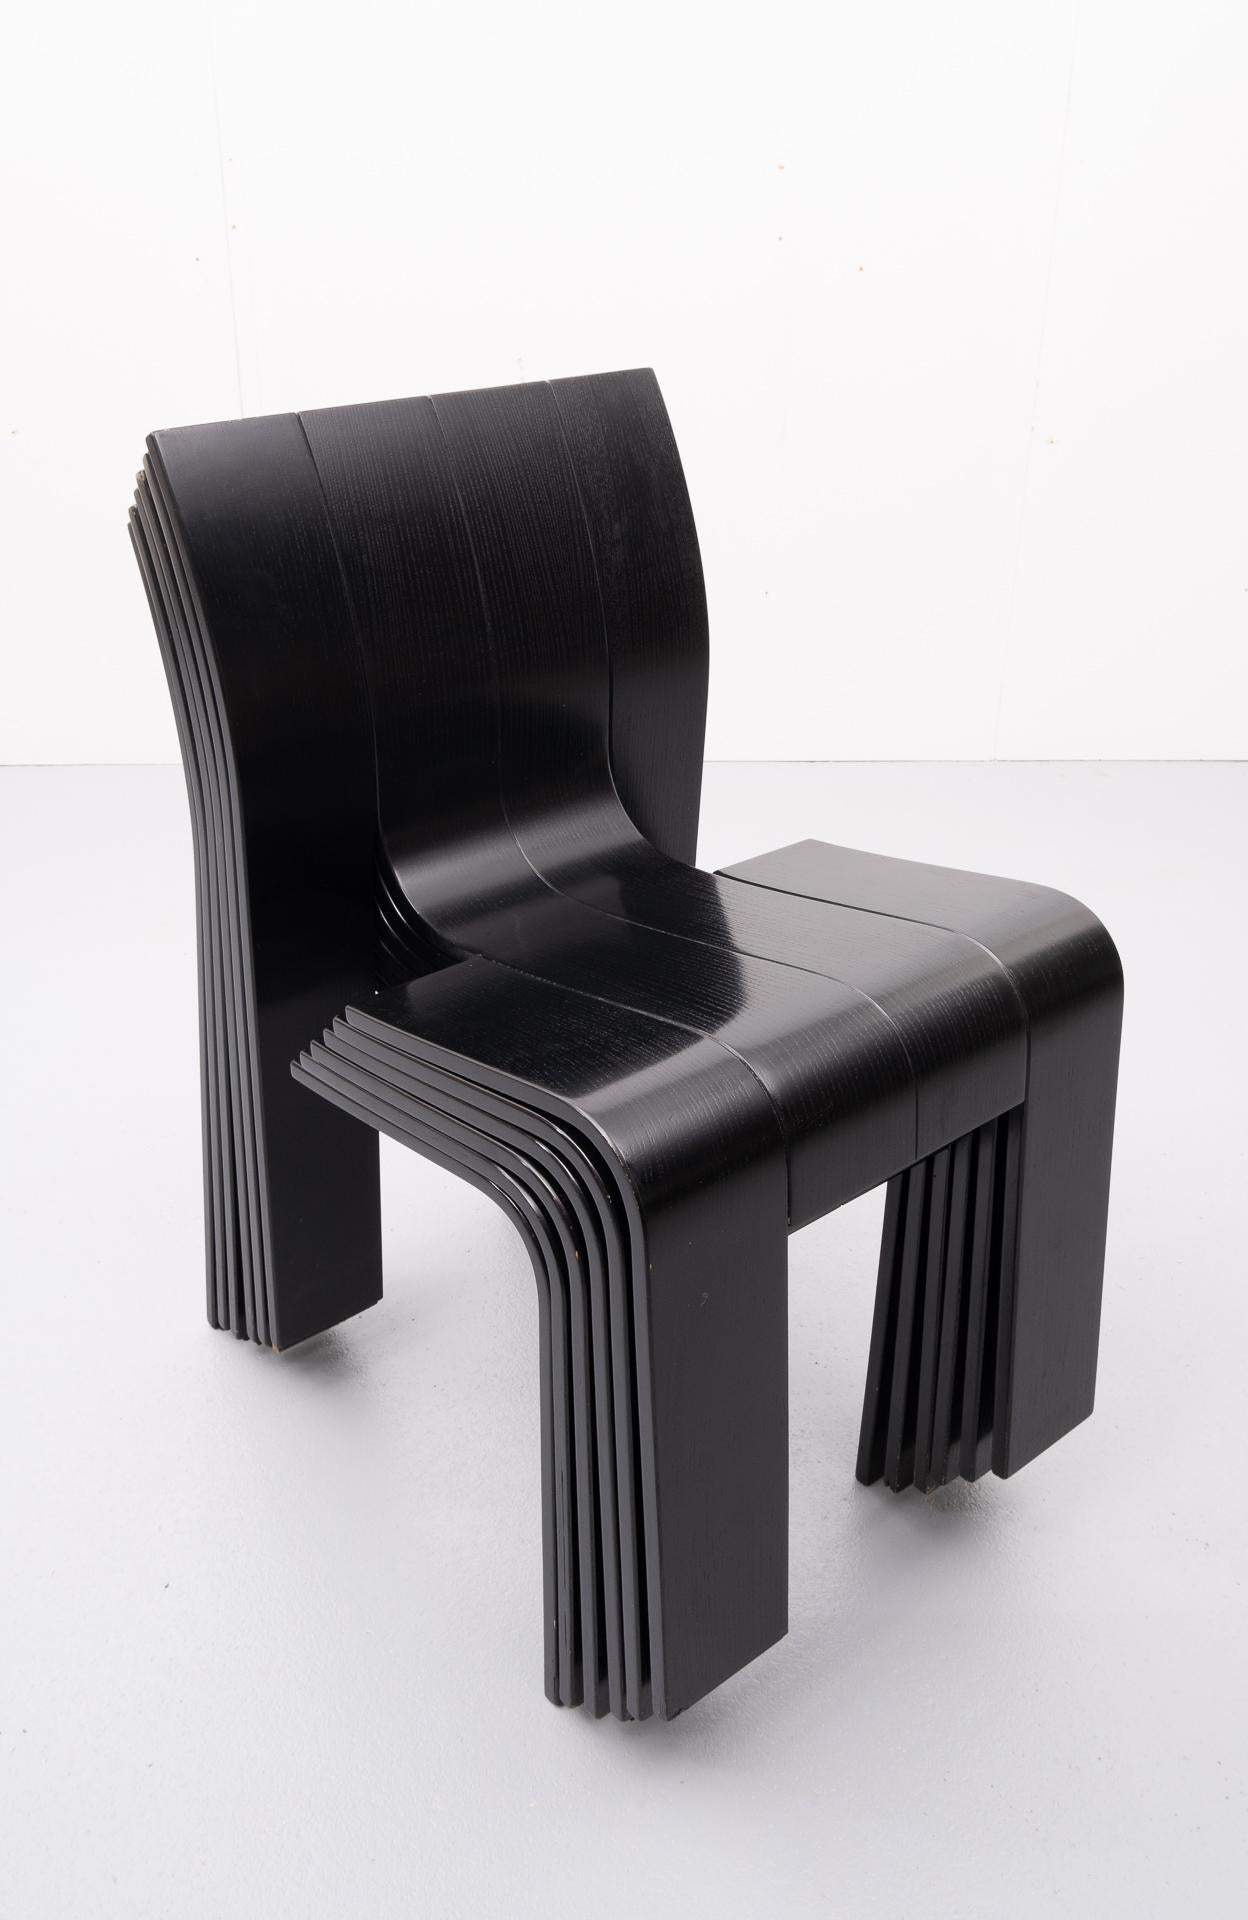 Gijs Bakker strip chairs for Castelijn 1974 6 chairs and the matching table. Beautiful black color. The chairs can be sold separately.
The underlying idea was to reduce the complexity of the chair's form until a powerful image remained. The chair